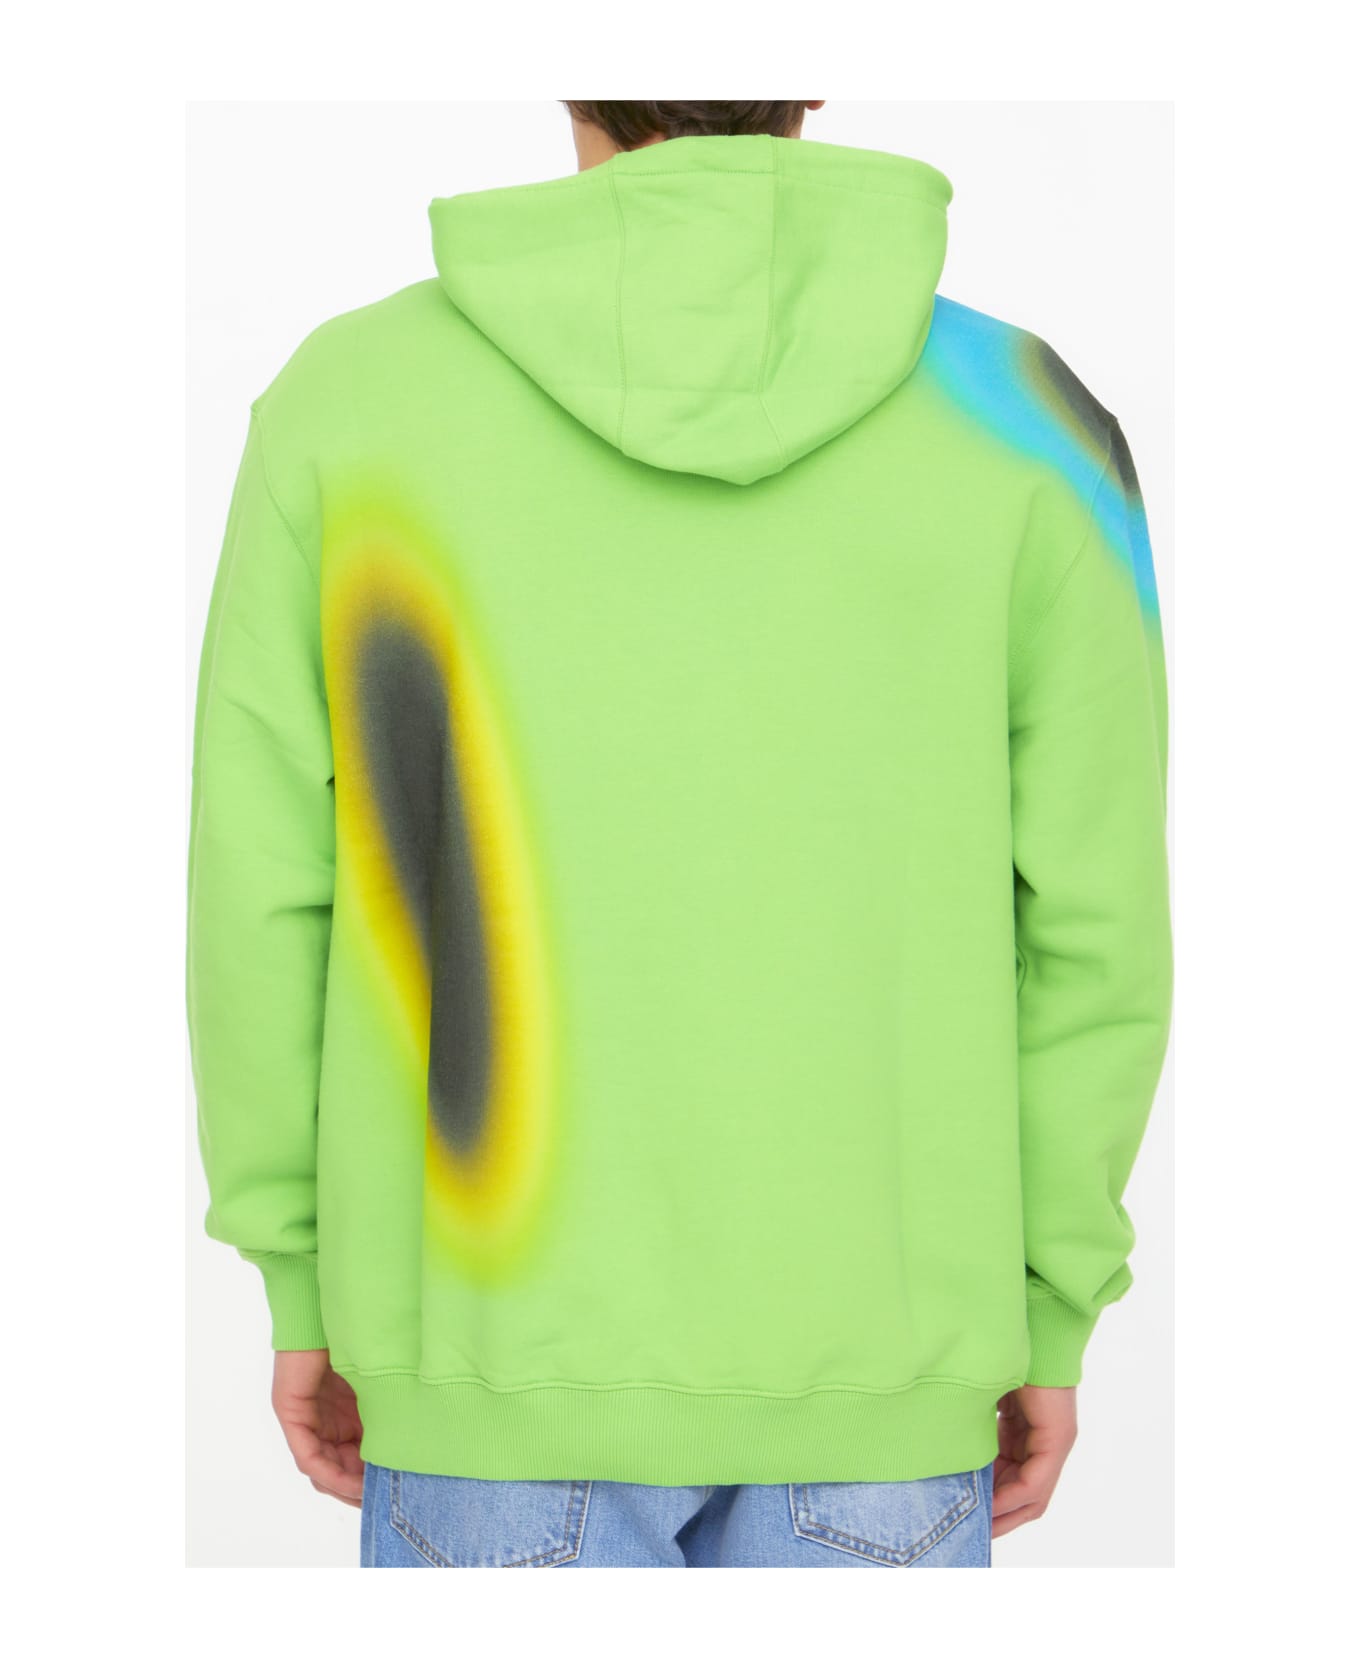 A-COLD-WALL Hypergraphic Hoodie - GREEN